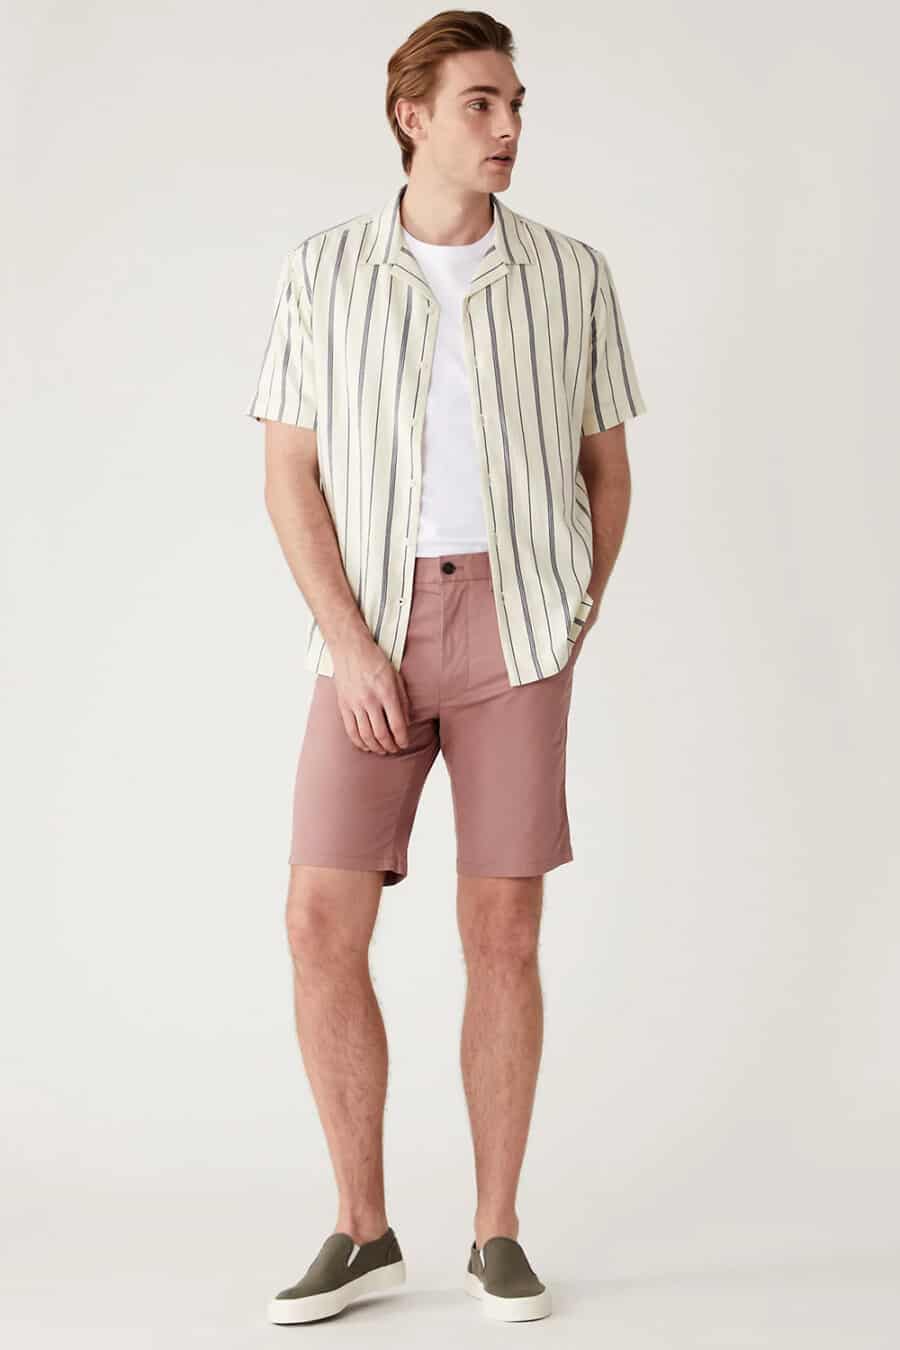 Men's pink chino shorts, white T-shirt, stripe beige short sleeve shirt and green suede slip on sneakers outfit